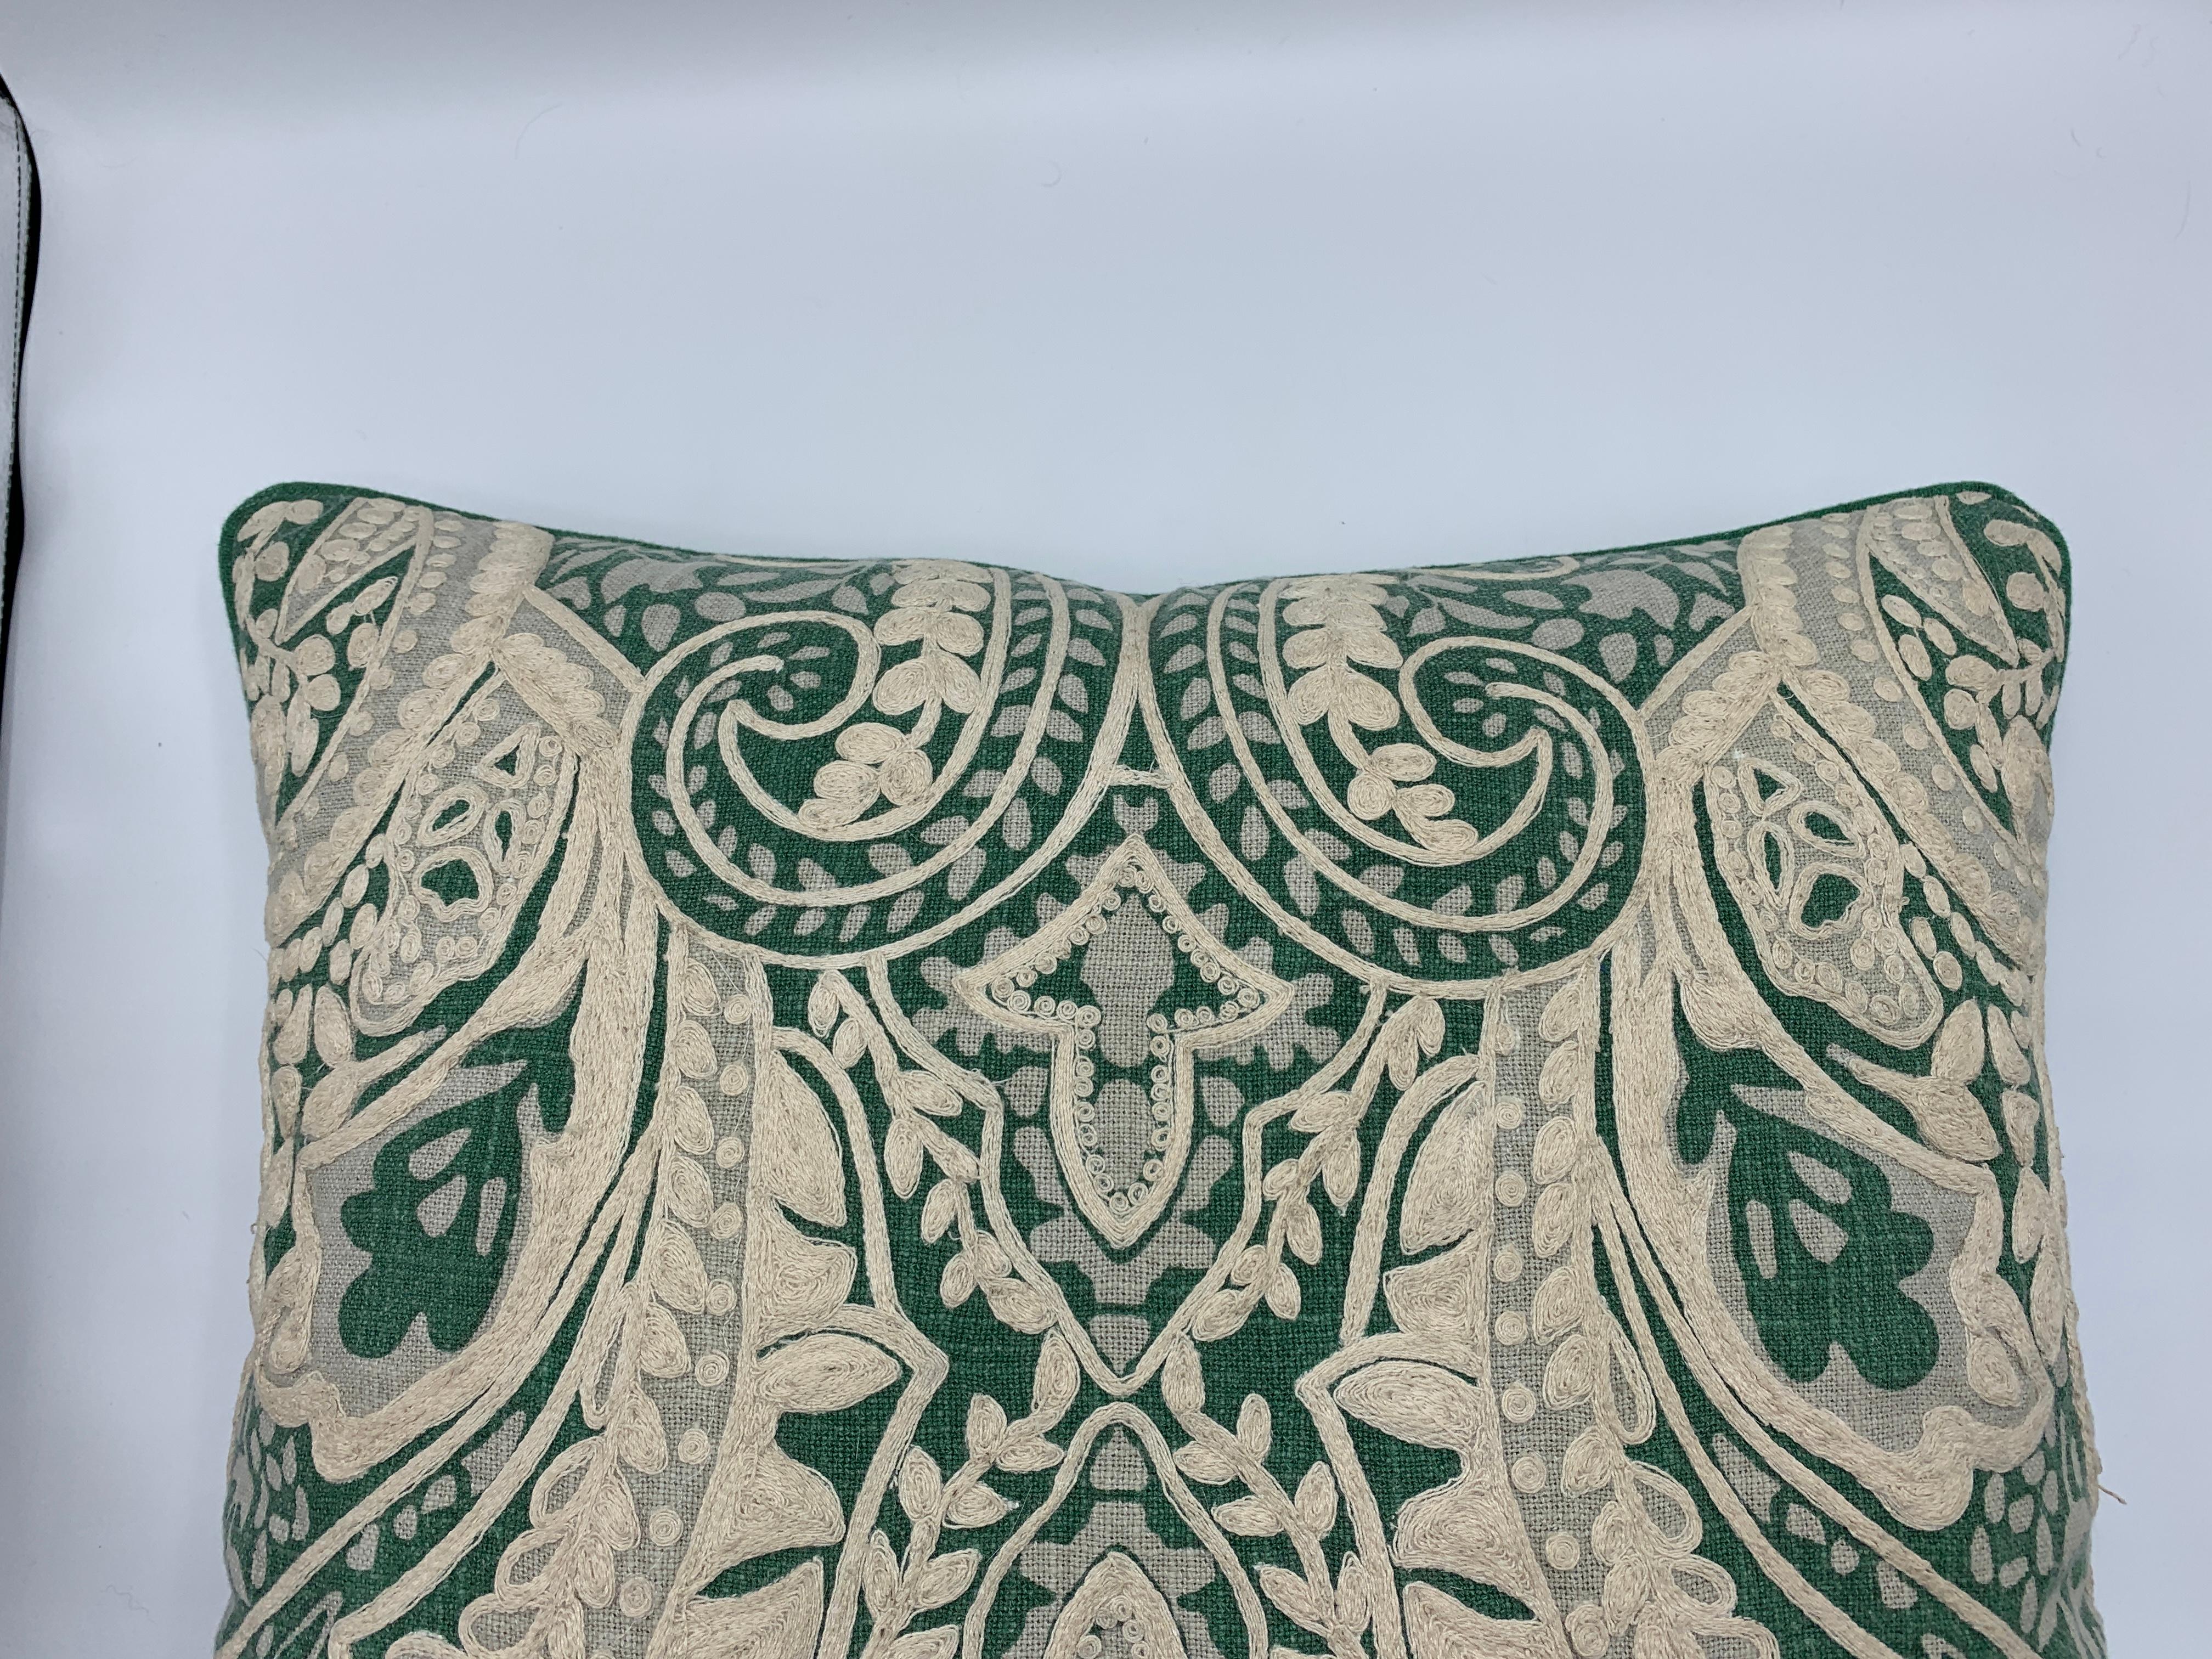 Green and White Linen Pillows with Damask Embroidery, Pair For Sale 1